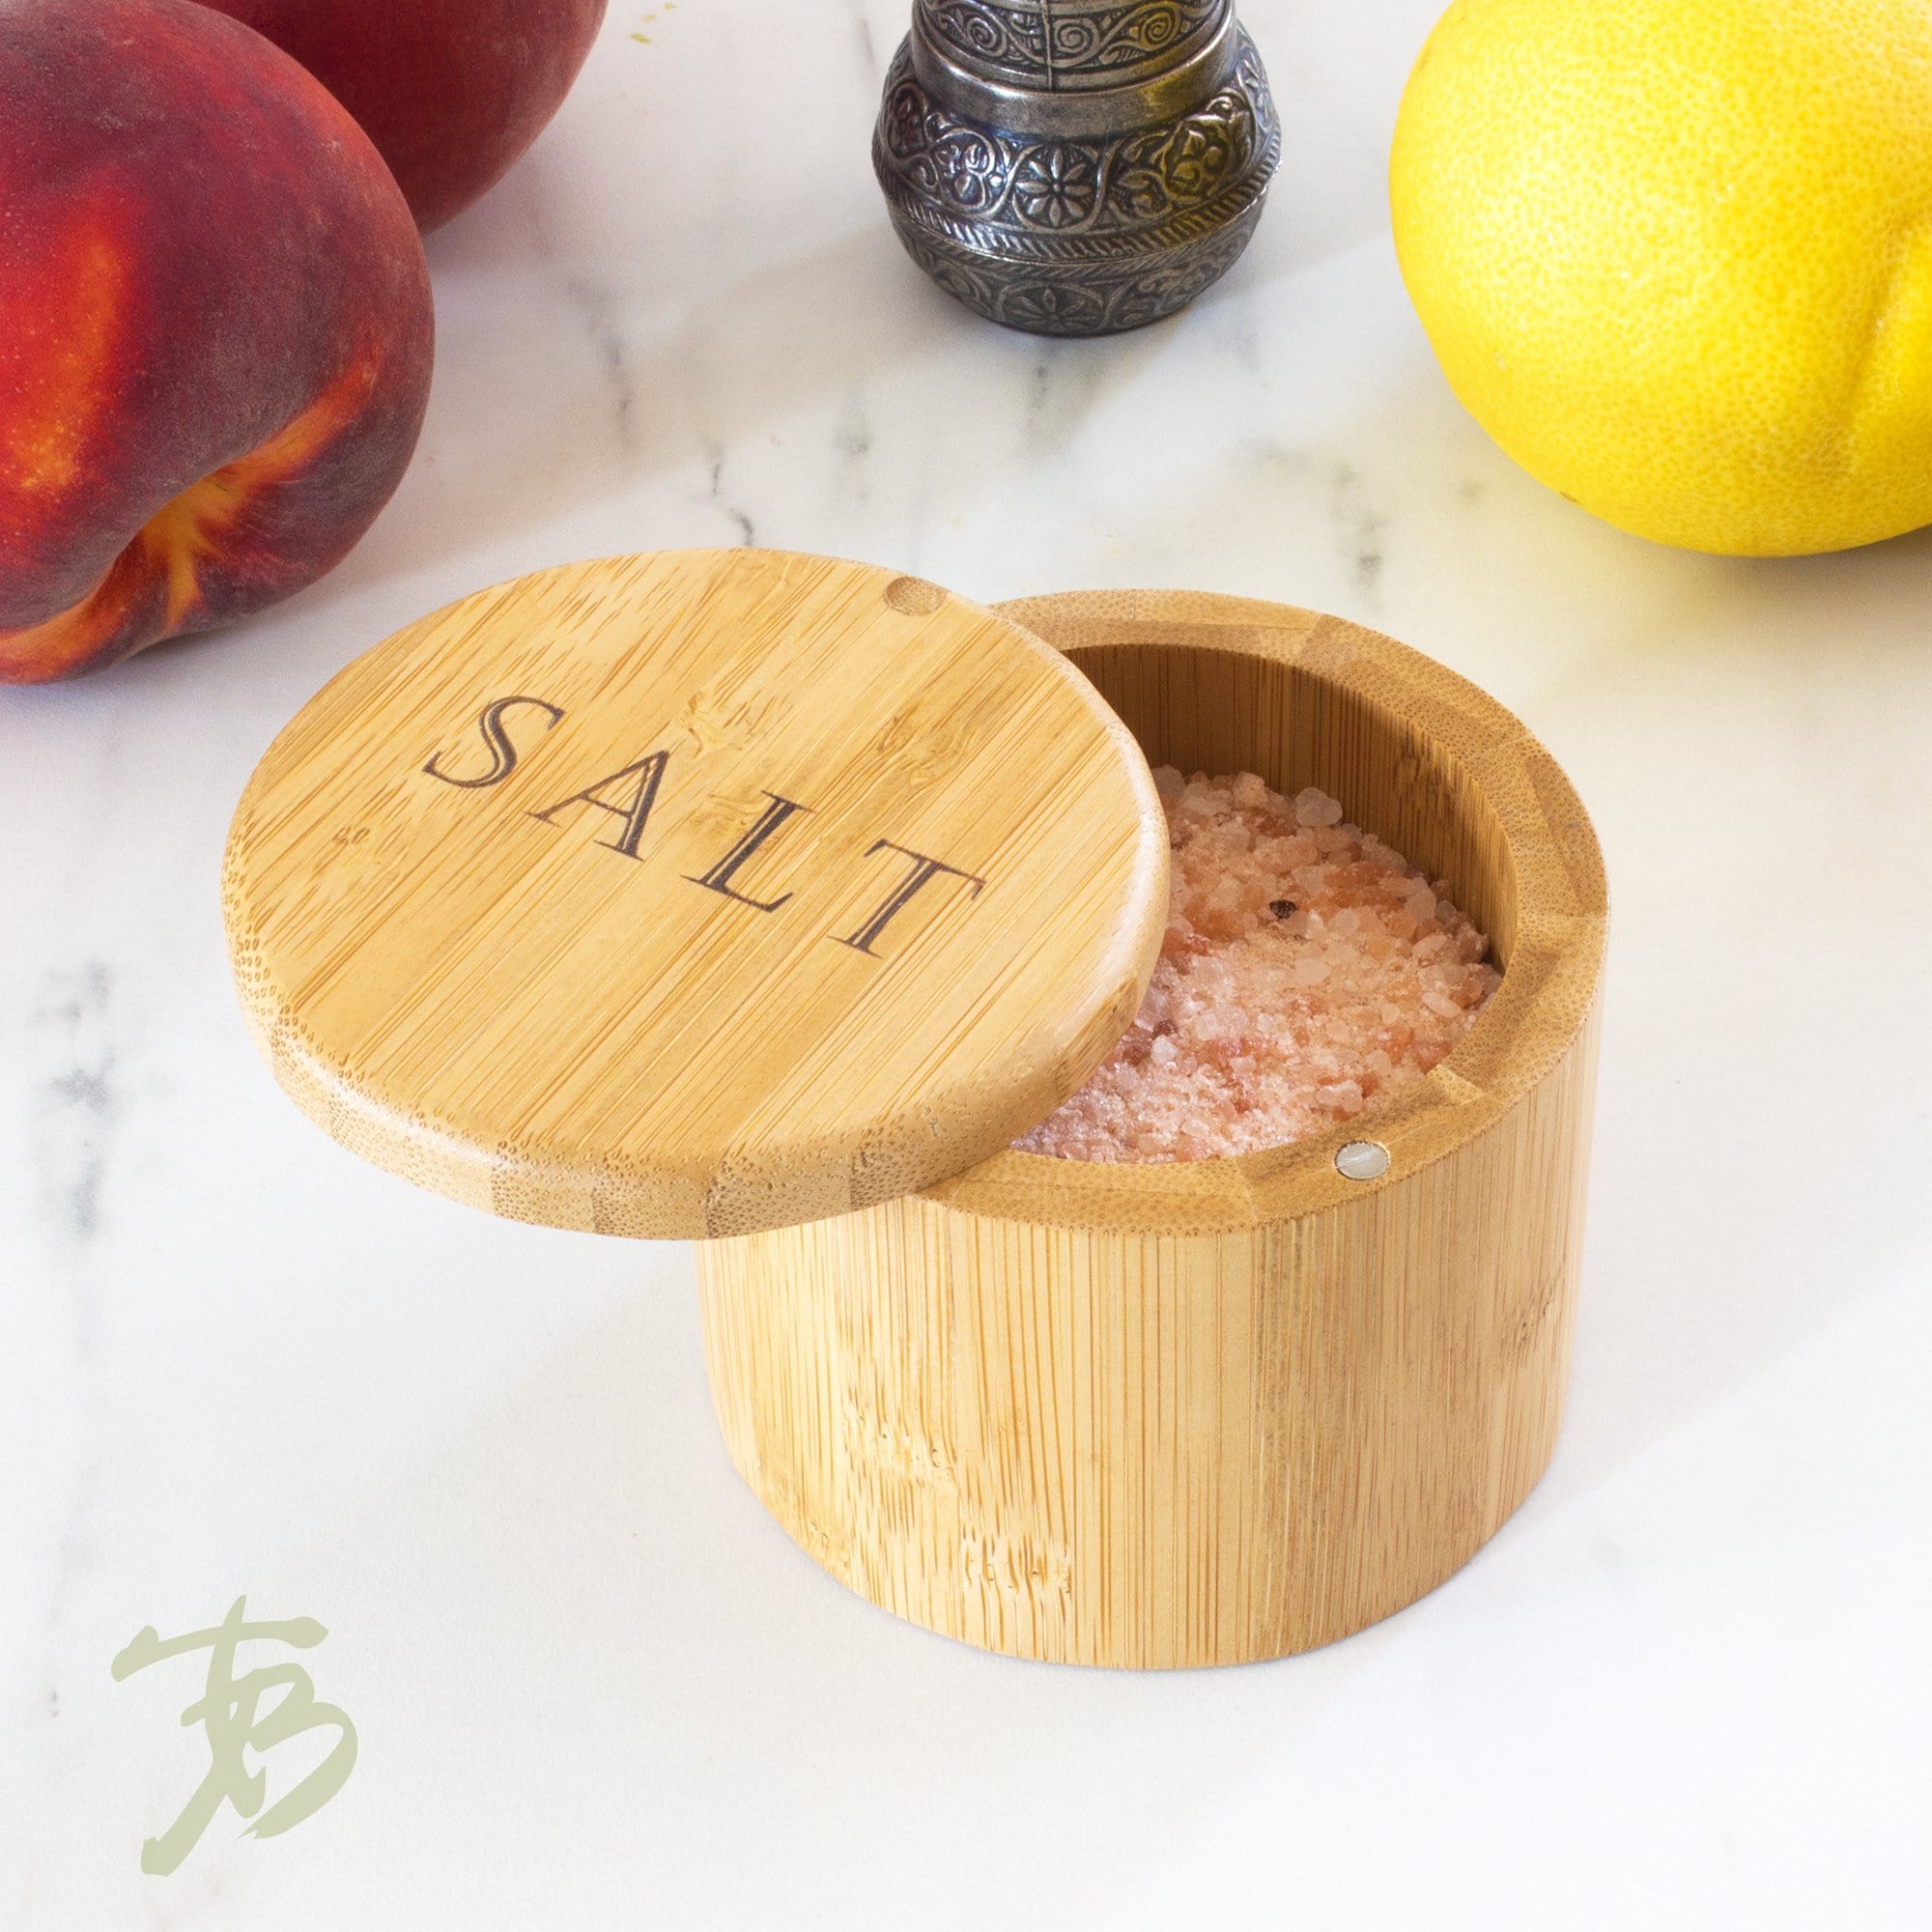 Totally Bamboo Salt Box with Magnetic Swivel Lid, "Salt" Engraving on Lid